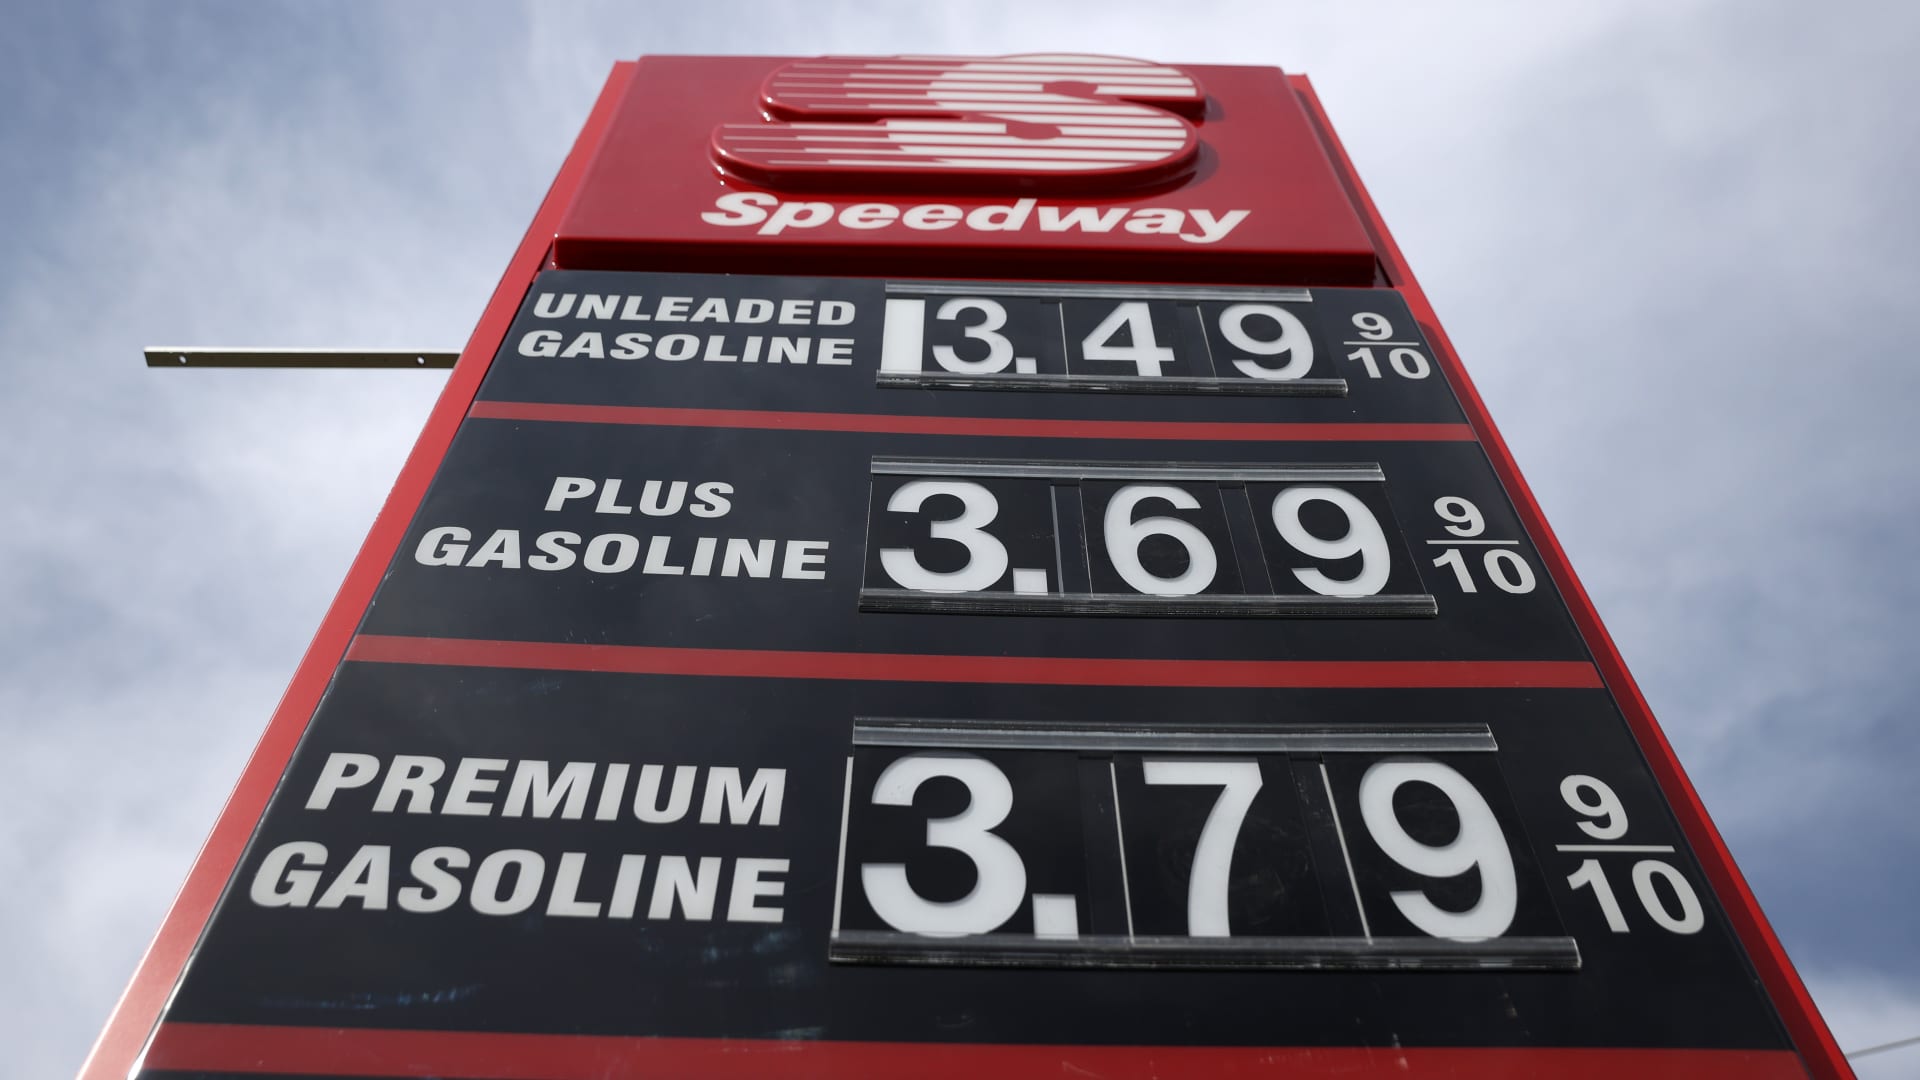 Gas prices are displayed at a Speedway gas station on March 03, 2021 in Martinez, California.